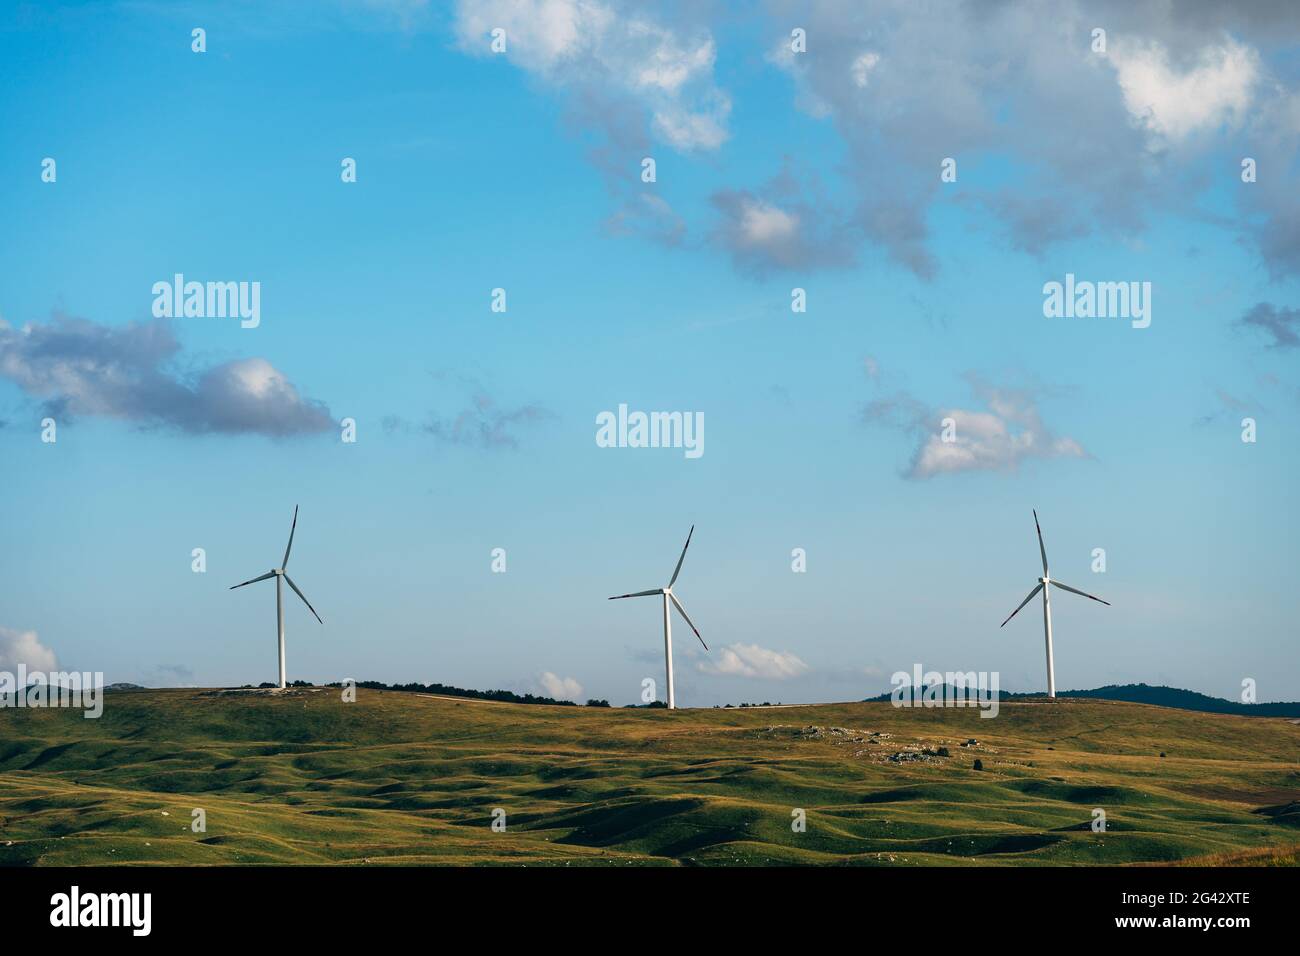 Three high wind turbines in the field against the blue sky. Stock Photo